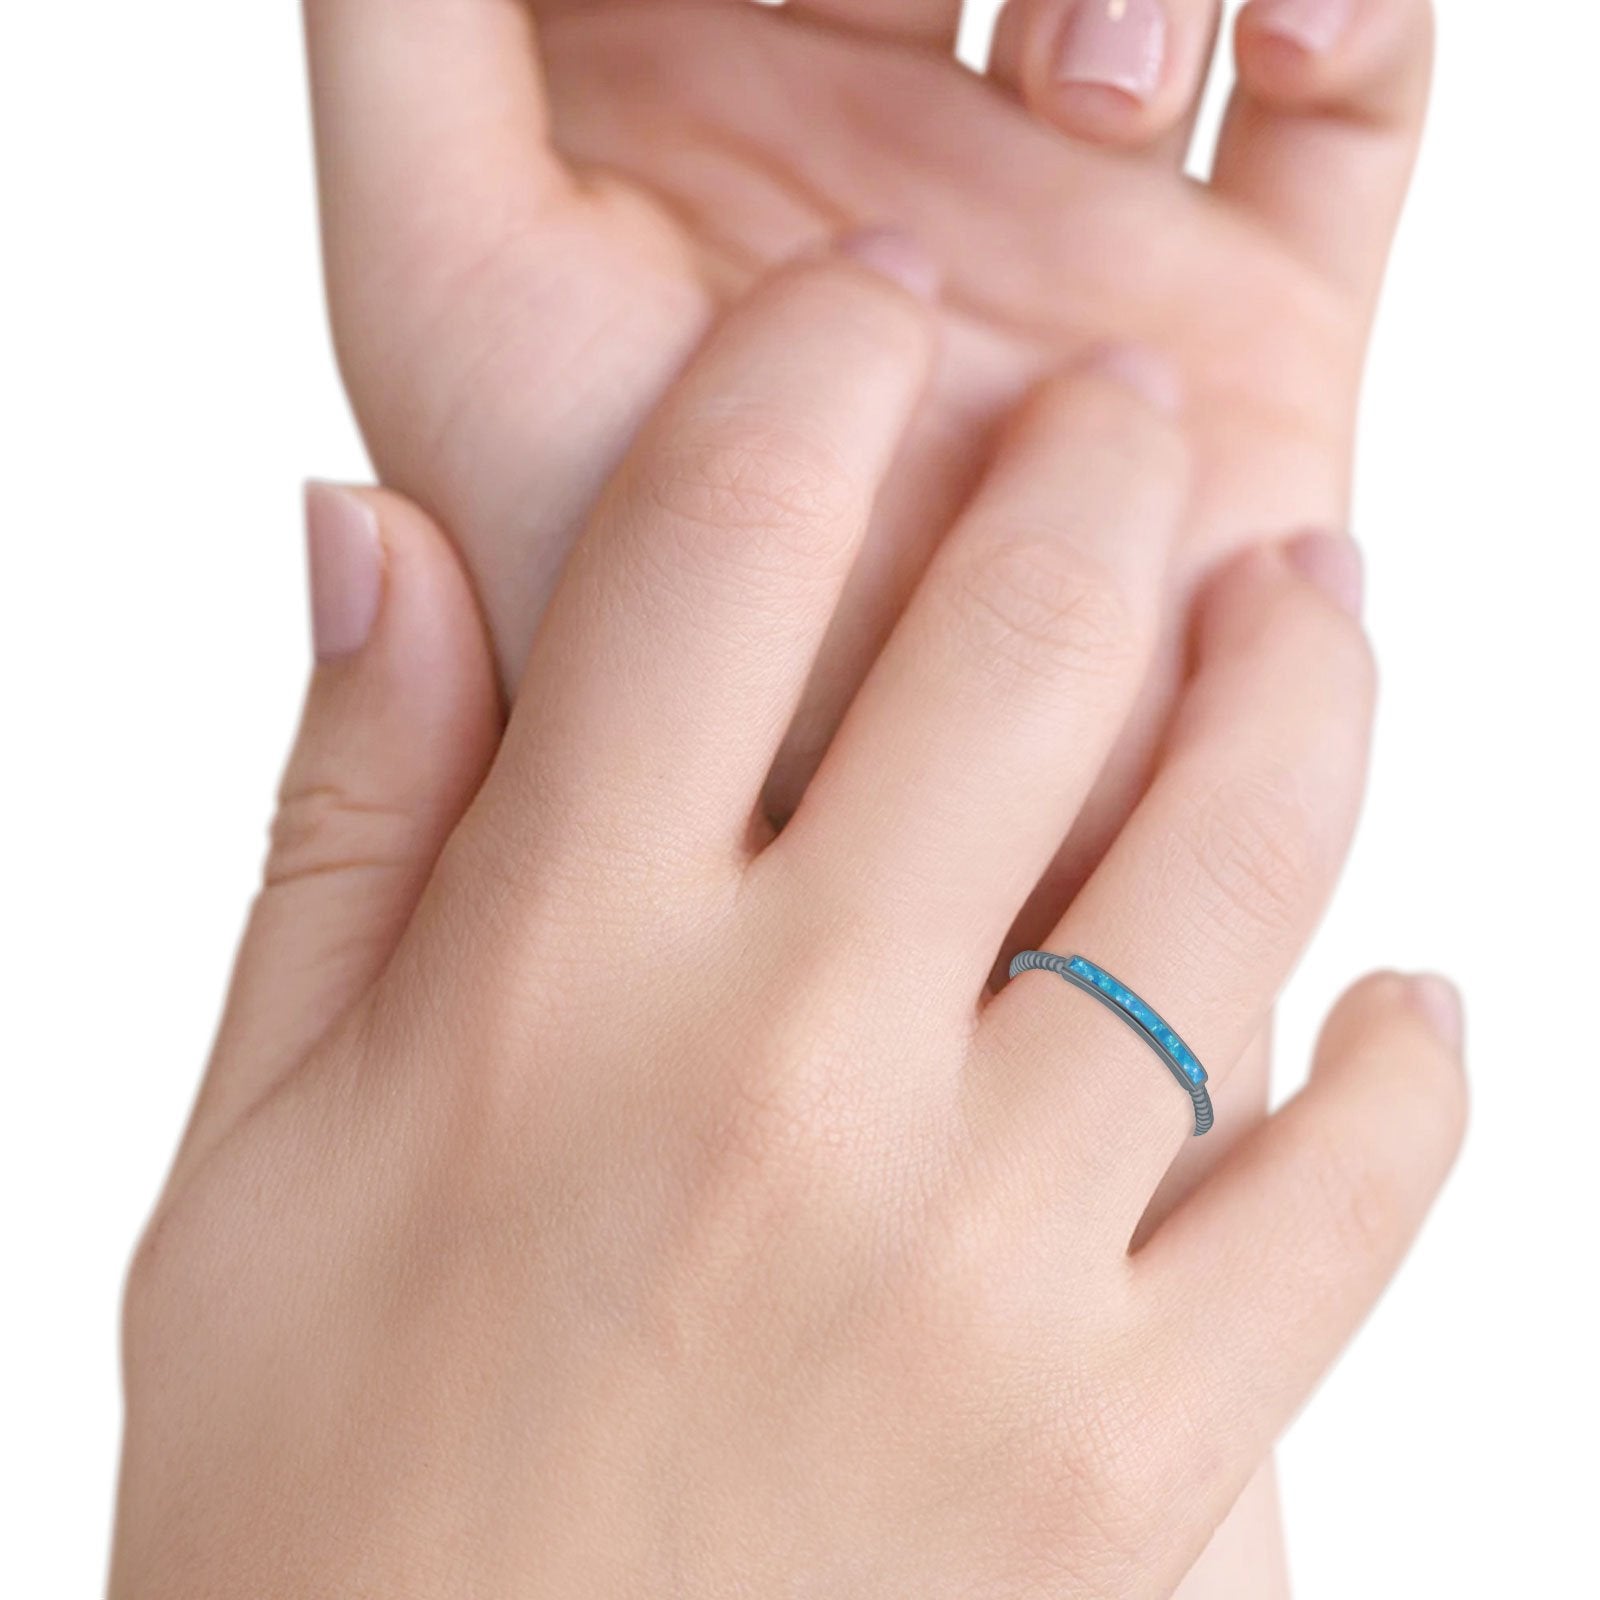 Simple Ring Band Lab Created Opal 925 Sterling Silver (2mm)